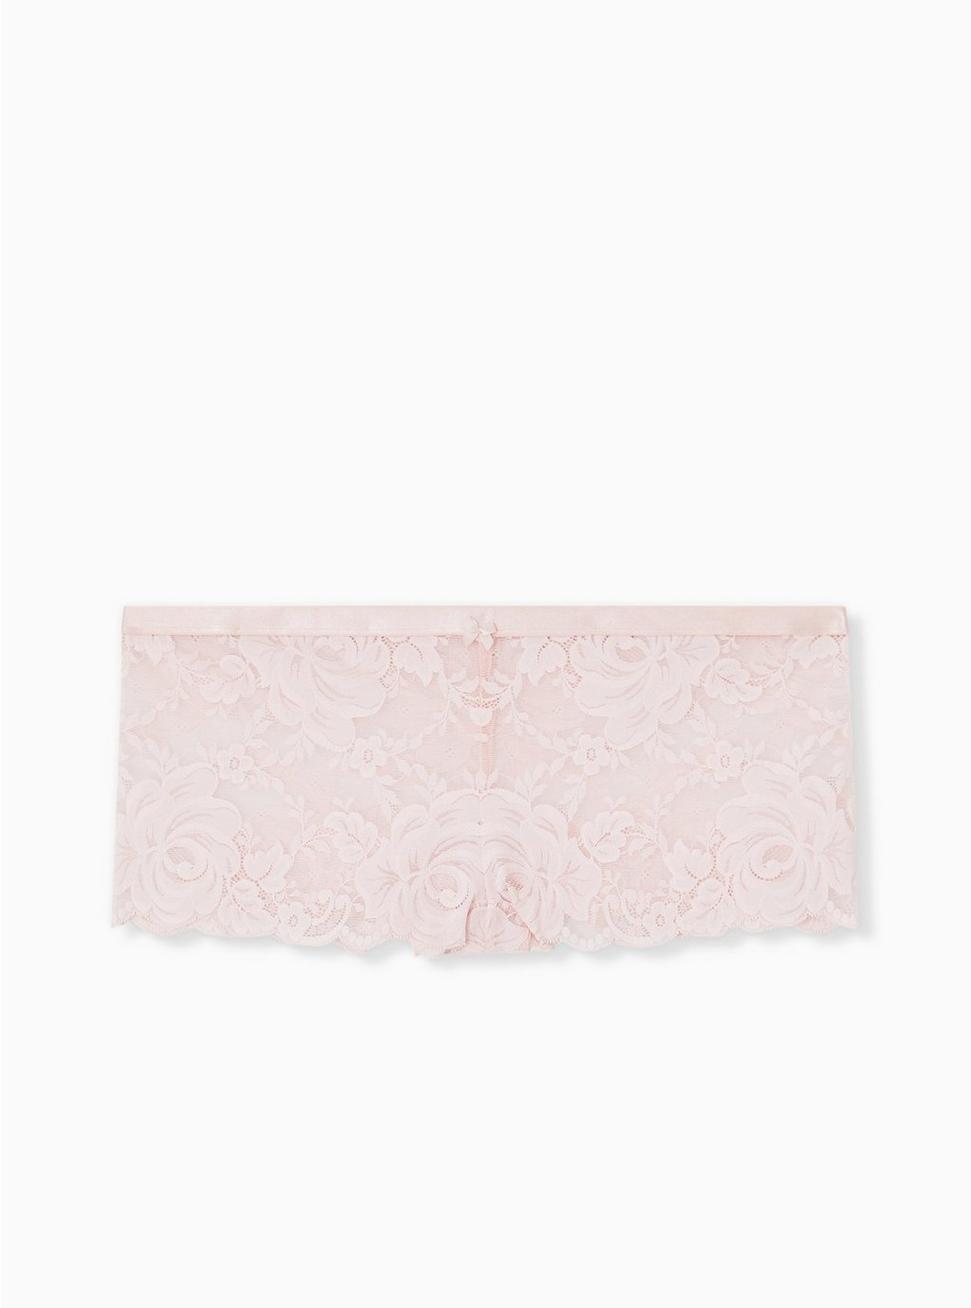 Exploded Floral Lace Mid-Rise Cheeky Panty, LOTUS PINK, hi-res